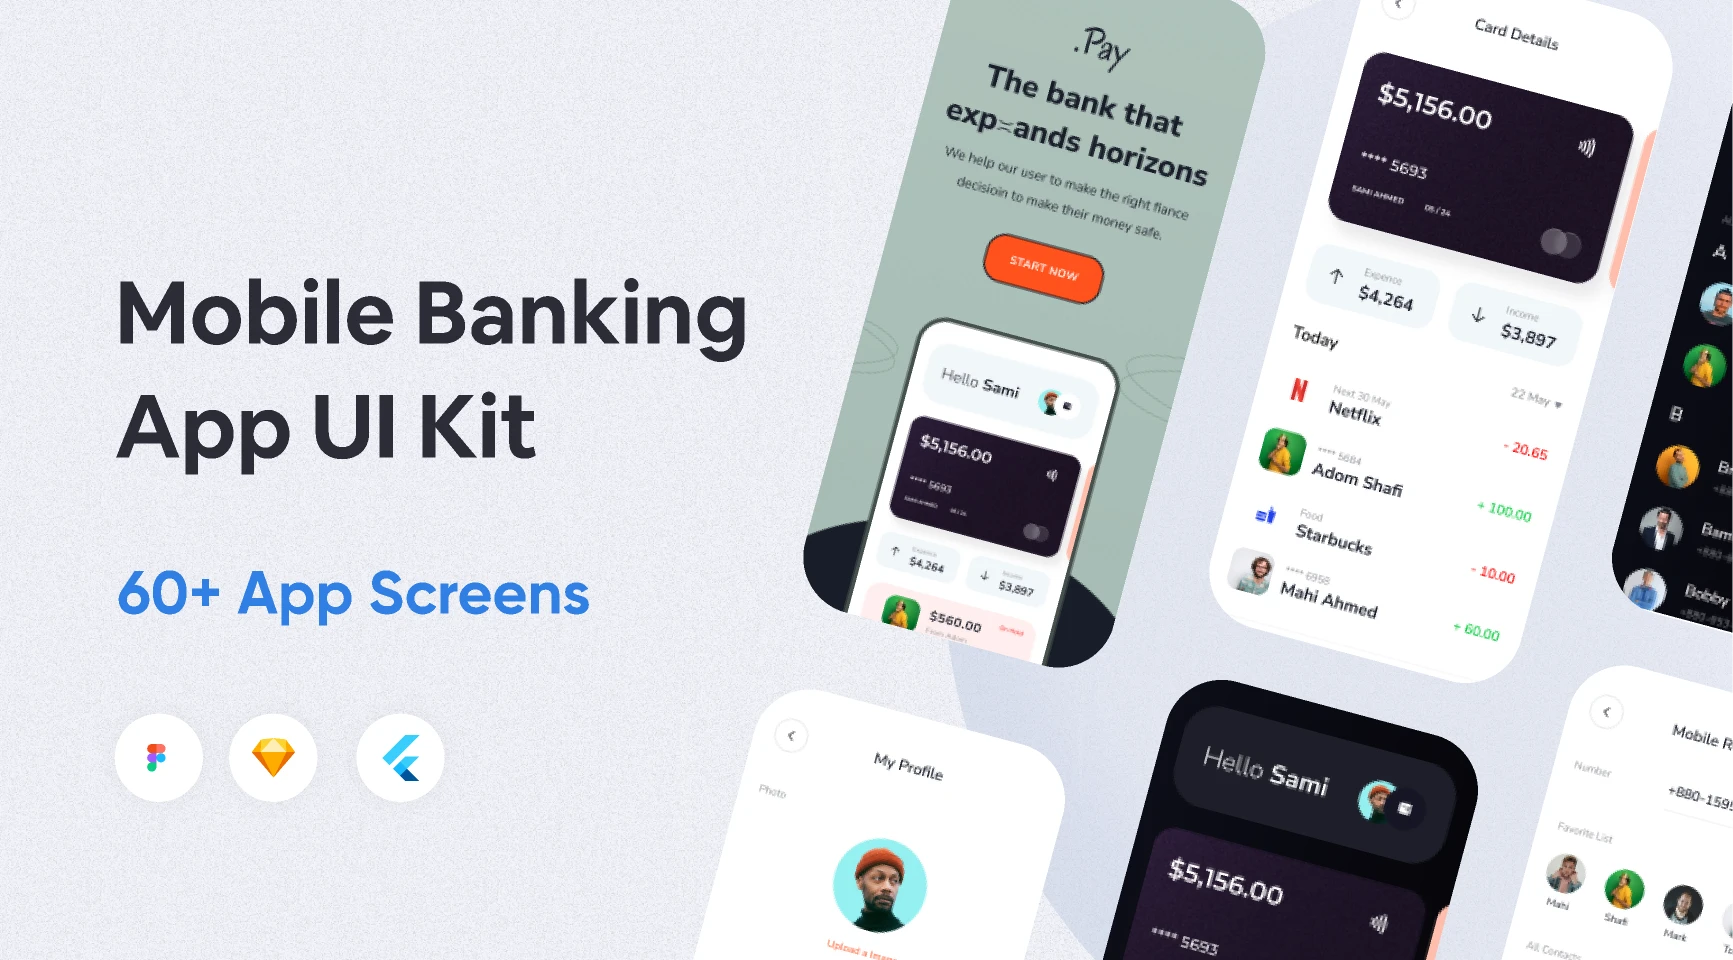 Mobile Banking App UI Kit for Figma and Adobe XD